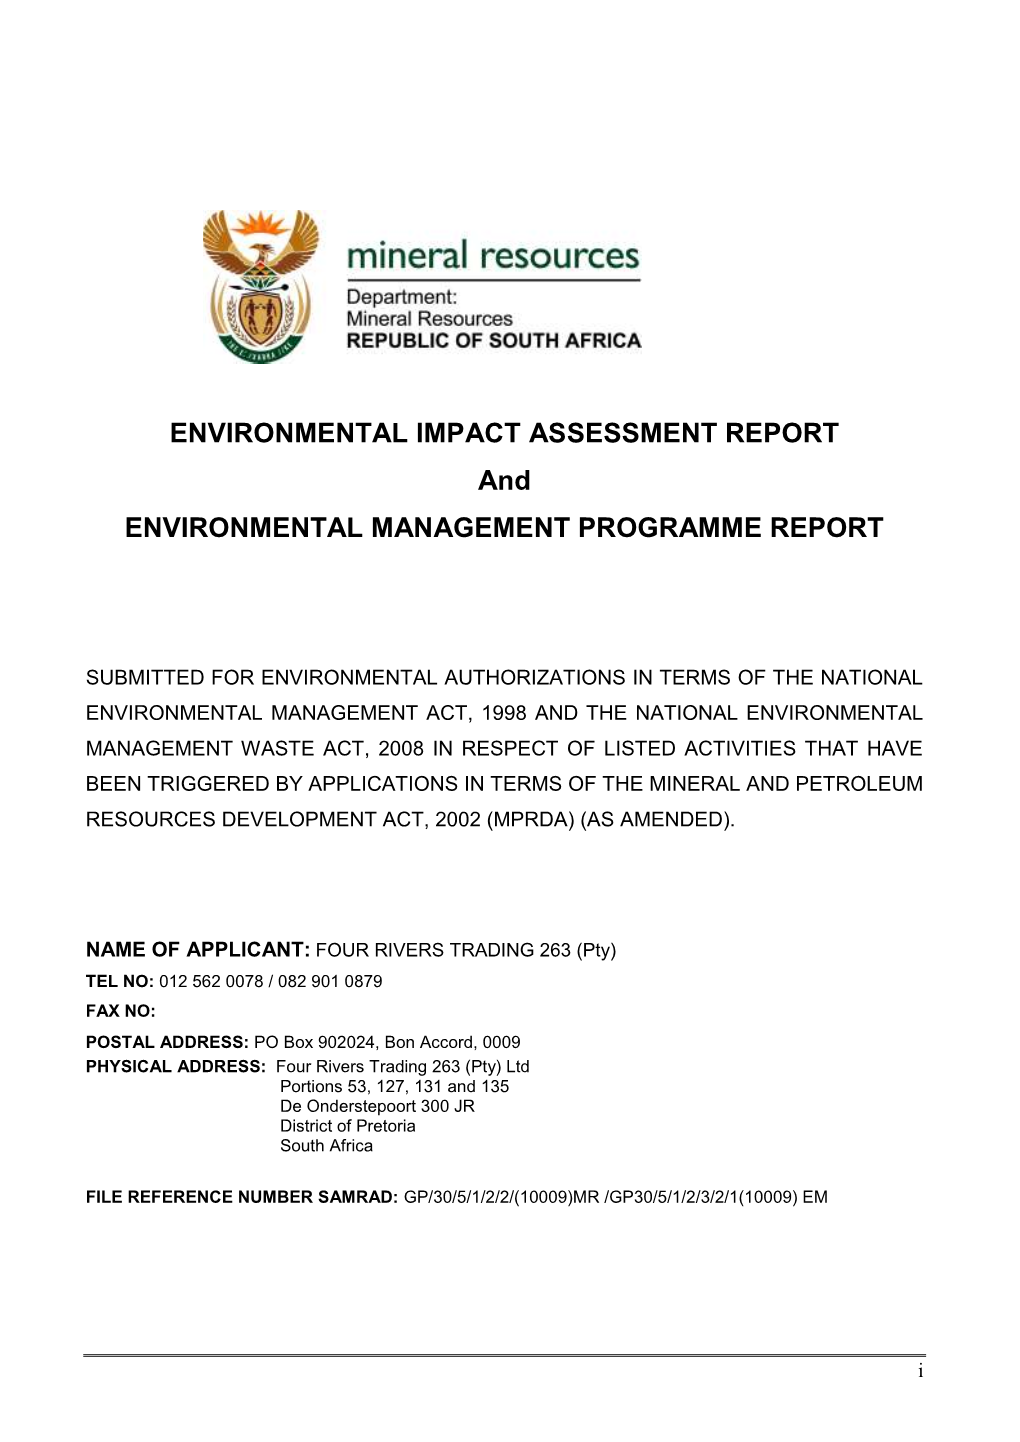 ENVIRONMENTAL IMPACT ASSESSMENT REPORT and ENVIRONMENTAL MANAGEMENT PROGRAMME REPORT